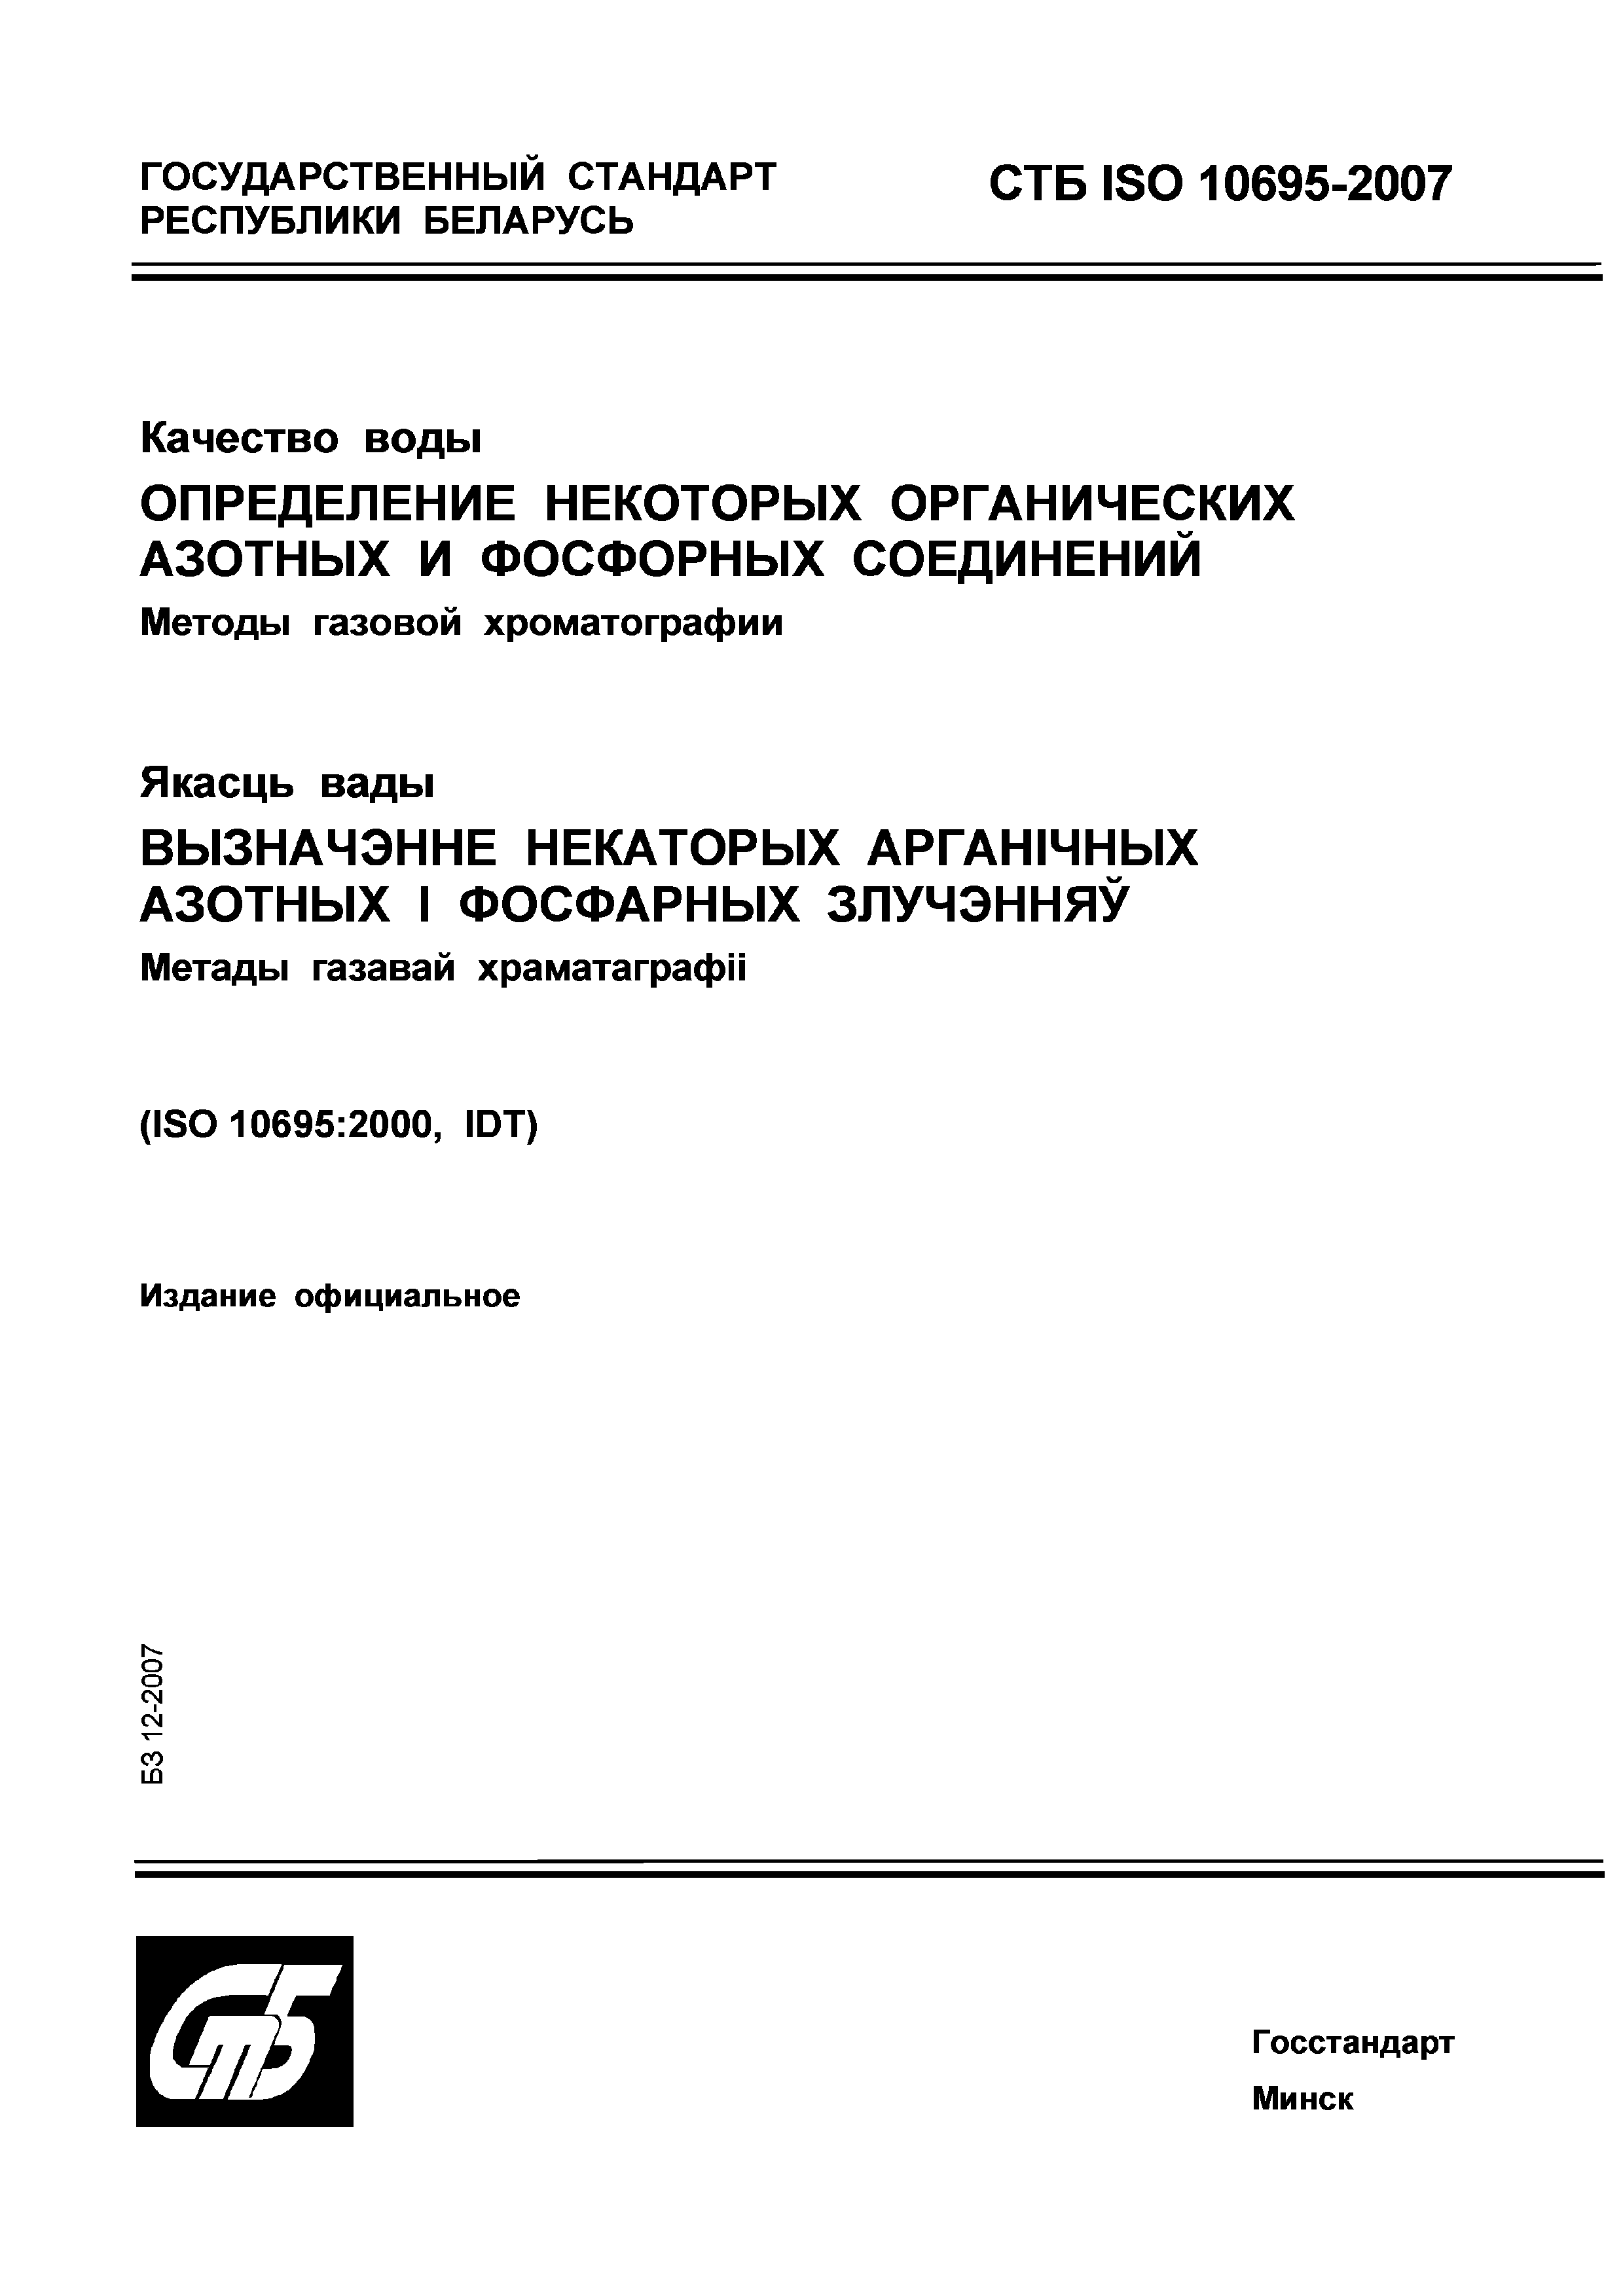 СТБ ISO 10695-2007